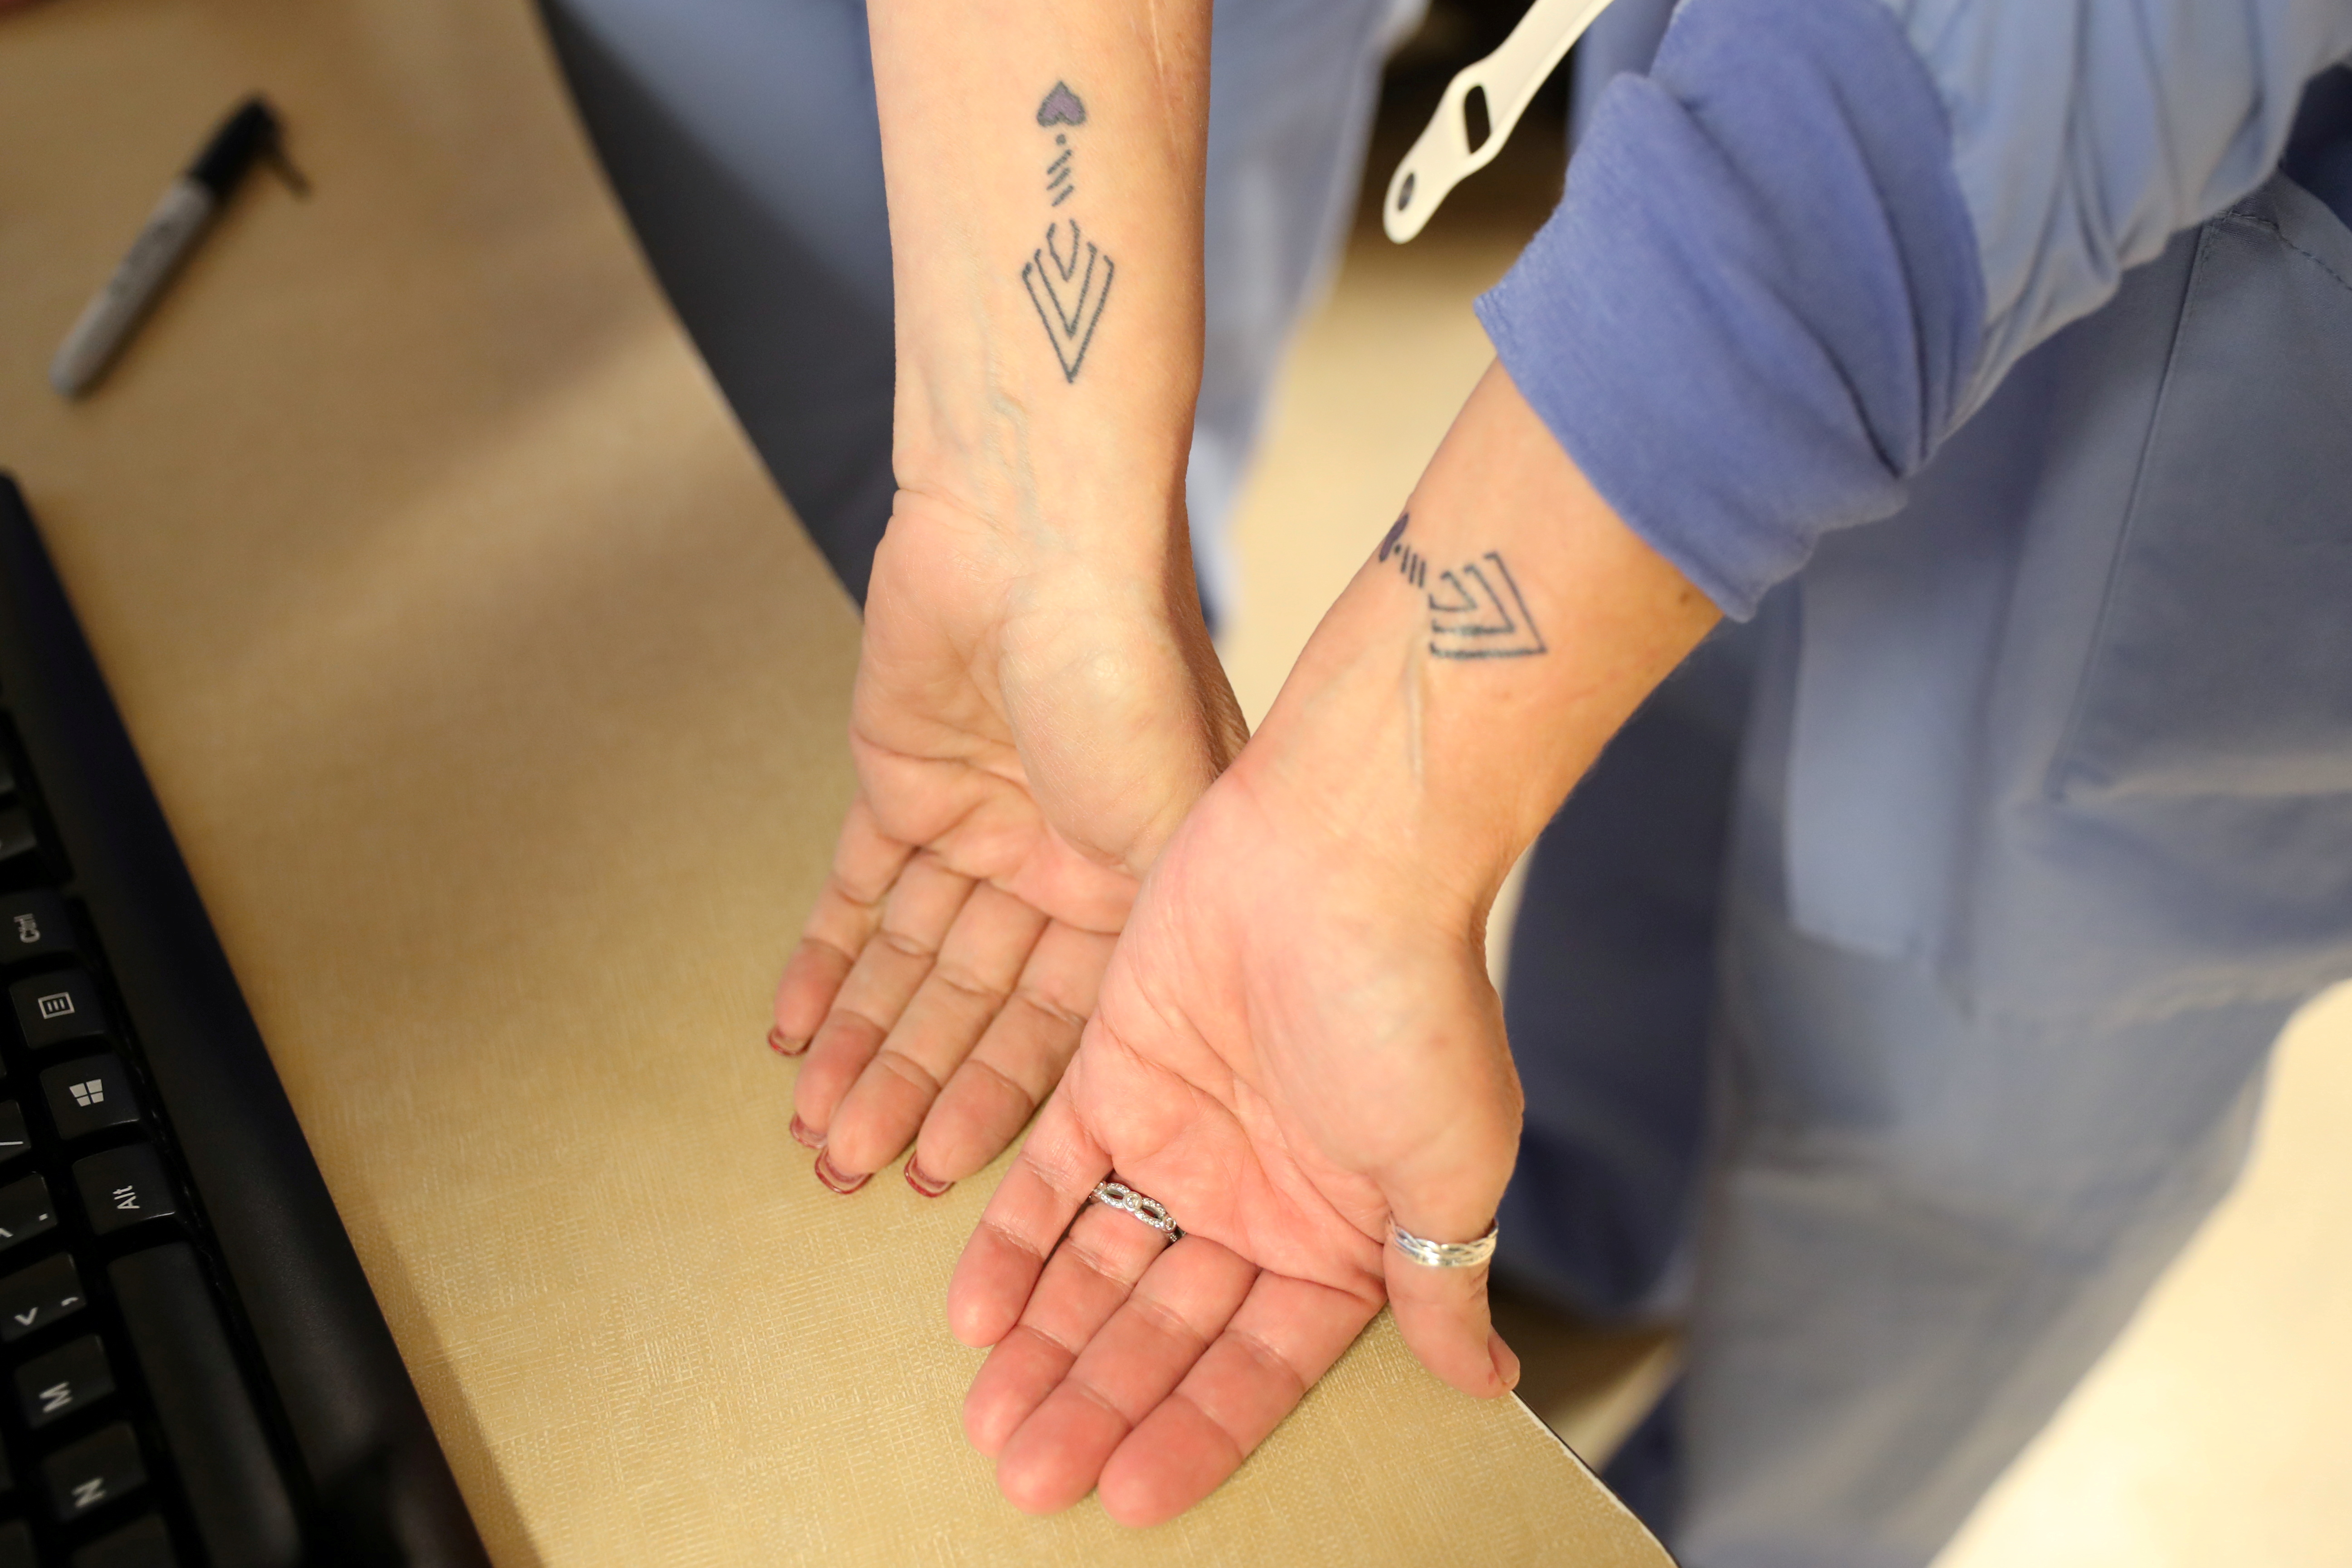 Coronavirus disease (COVID-19) ICU nurses display tattoos they all got to commemorate their bond as frontline workers and the people they have lost, at Providence Mission Hospital in Mission Viejo, California, U.S., January 8, 2021. REUTERS/Lucy Nicholson